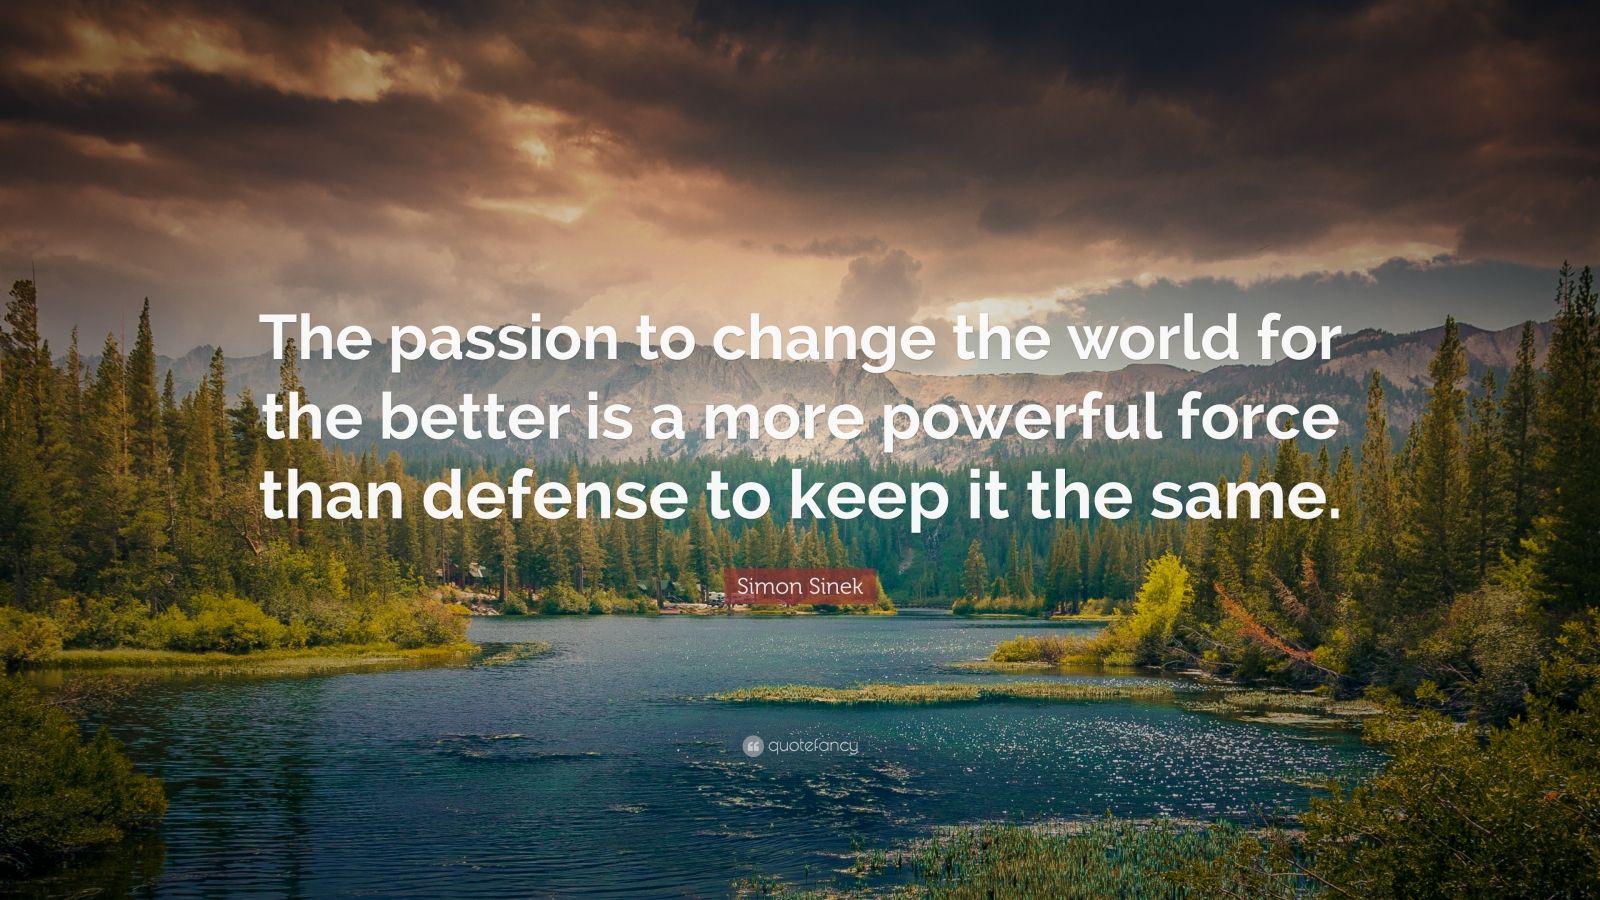 33+ Quotes About Changing The World For The Better